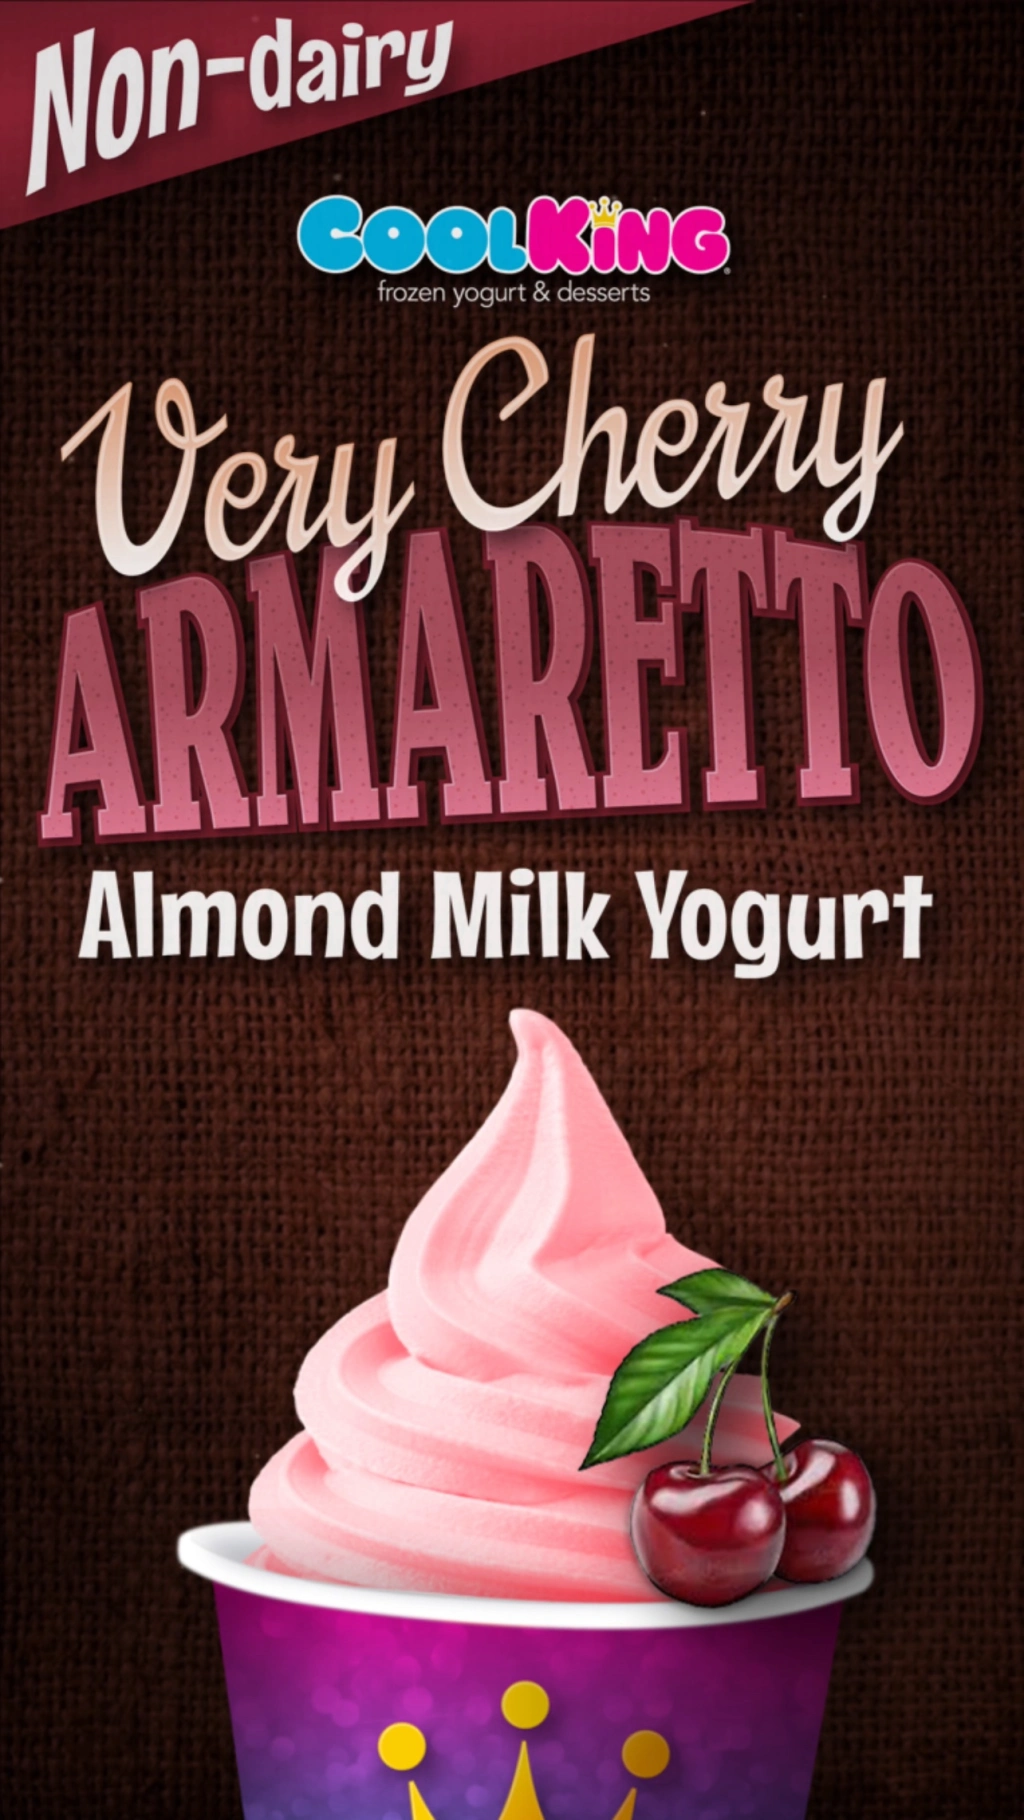 Cool King® “Very Cherry Amaretto” Almond Milk Yogurt Promotional Video and Flavor Card